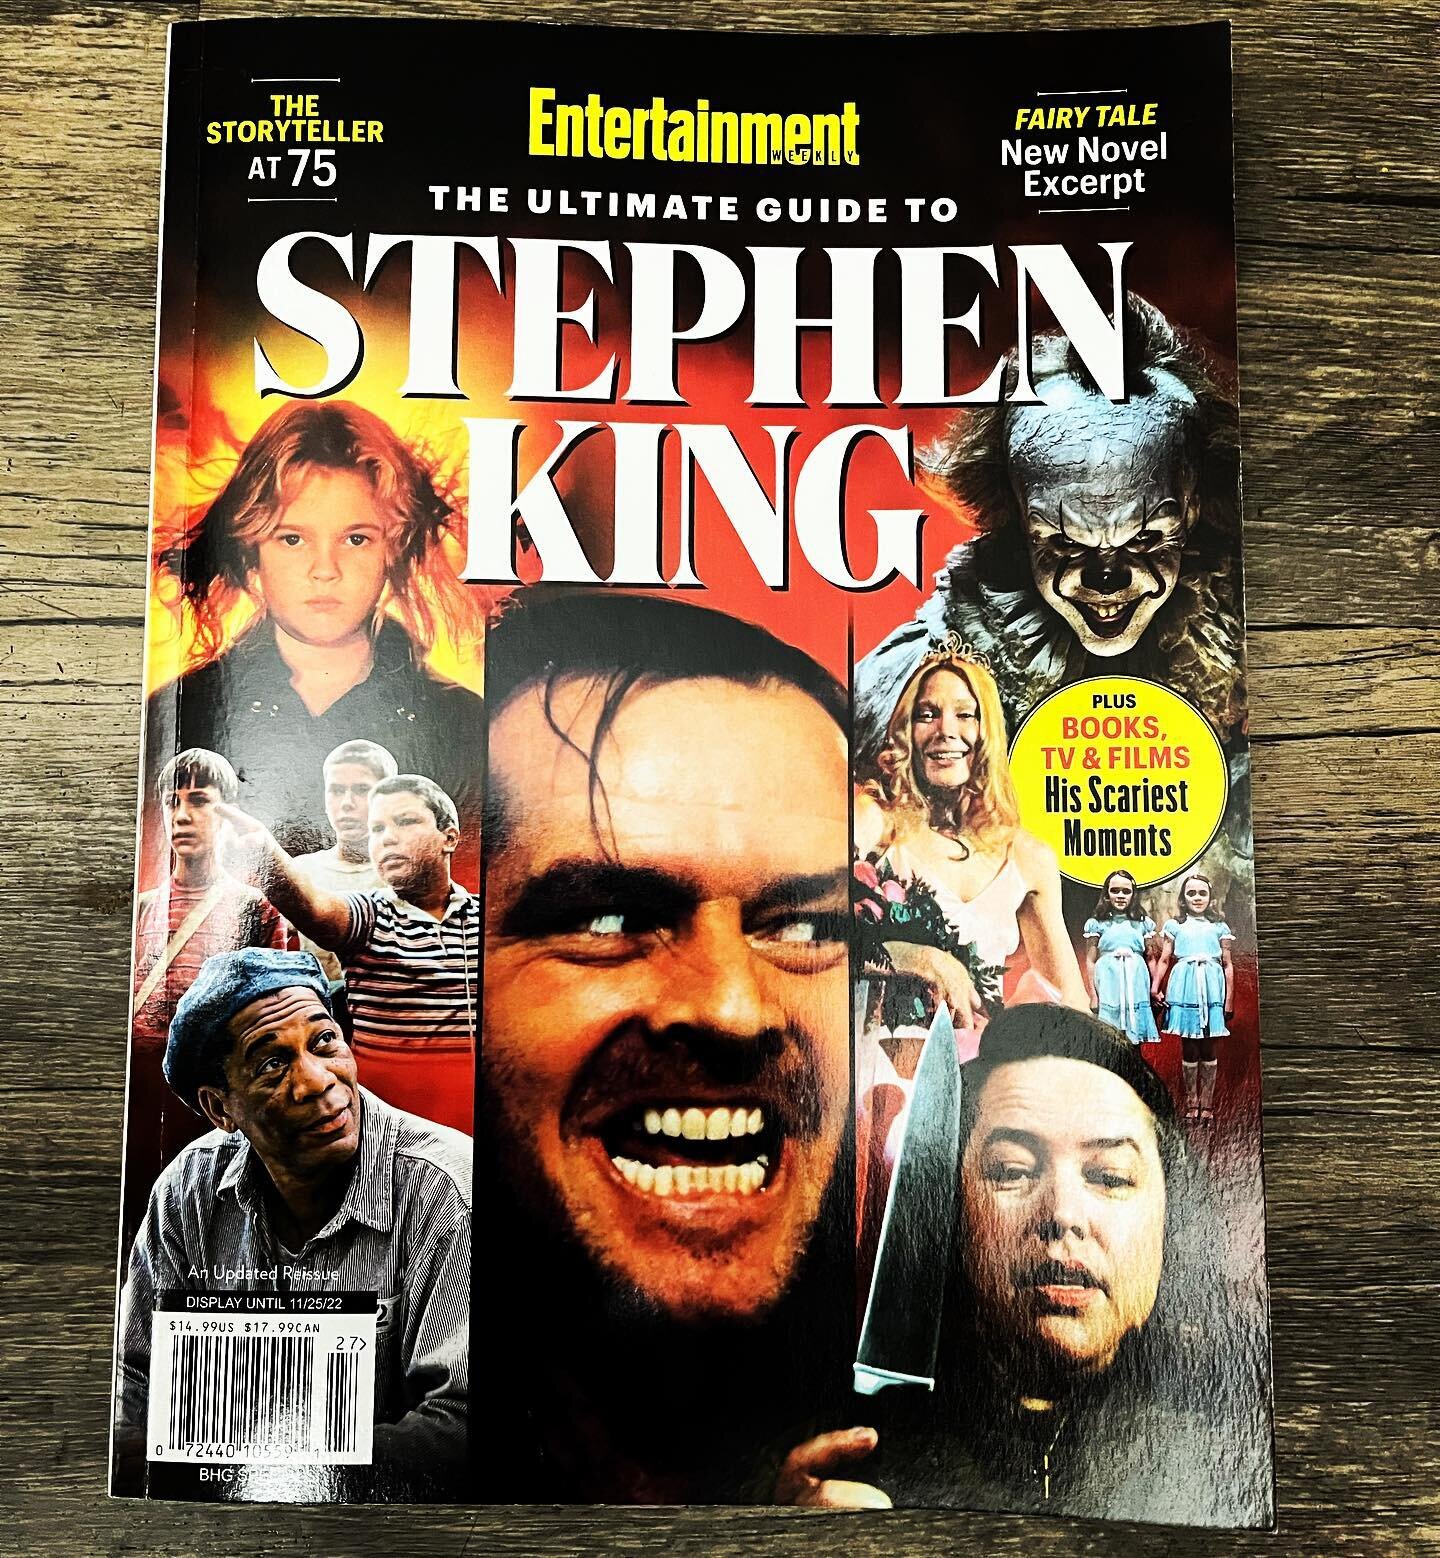 Excited to have found some worthy weekend reading at the magazine rack last night.
#reading #magazine #stephenking